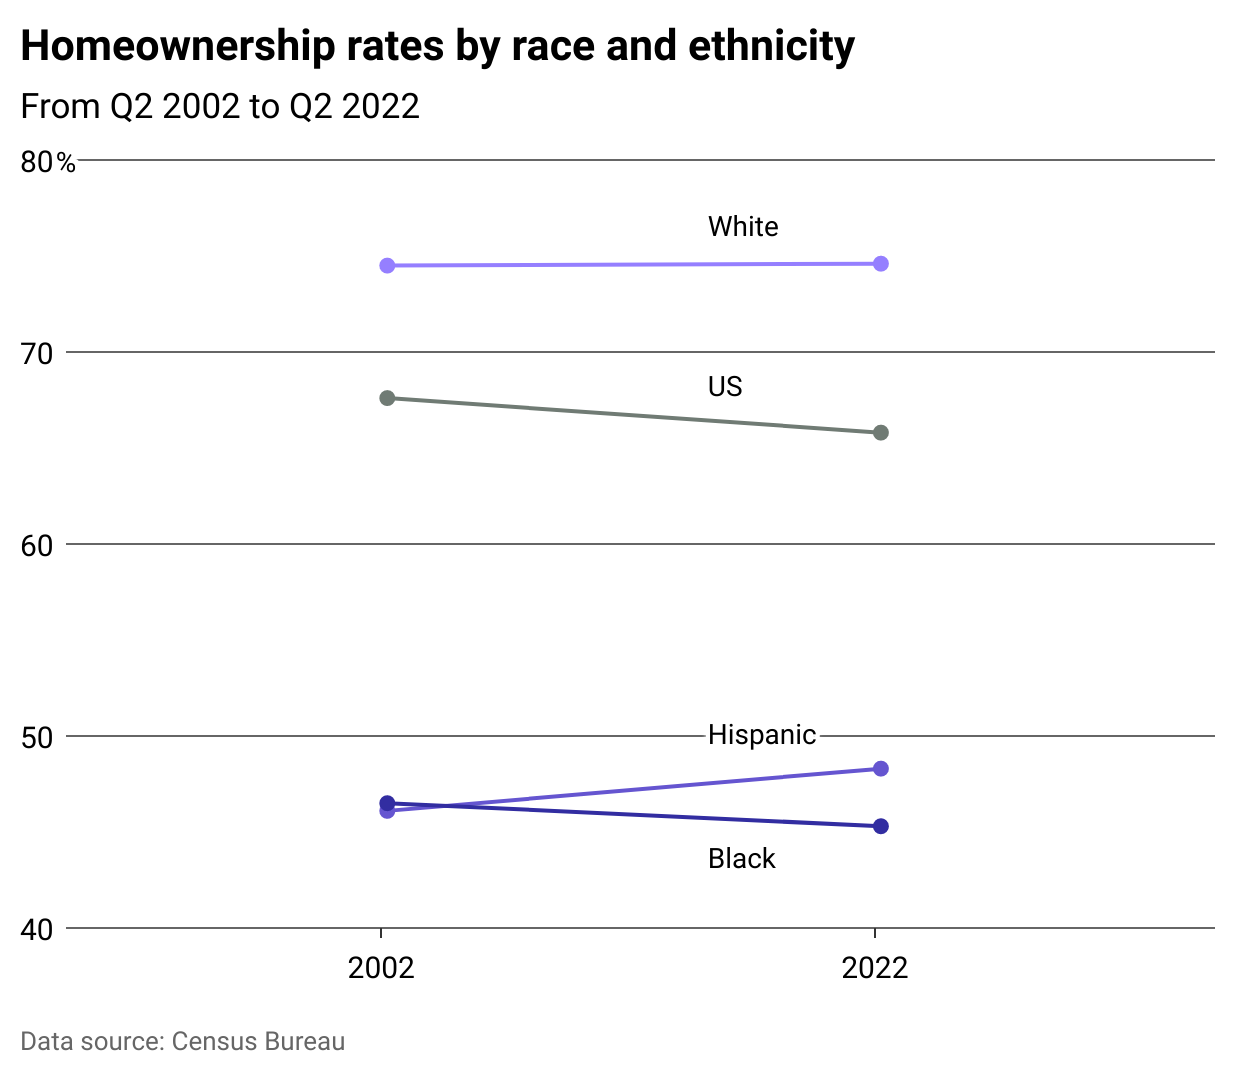 A slope chart showing the change in homeownership rates by race and ethnicity from 2002 to 2022.